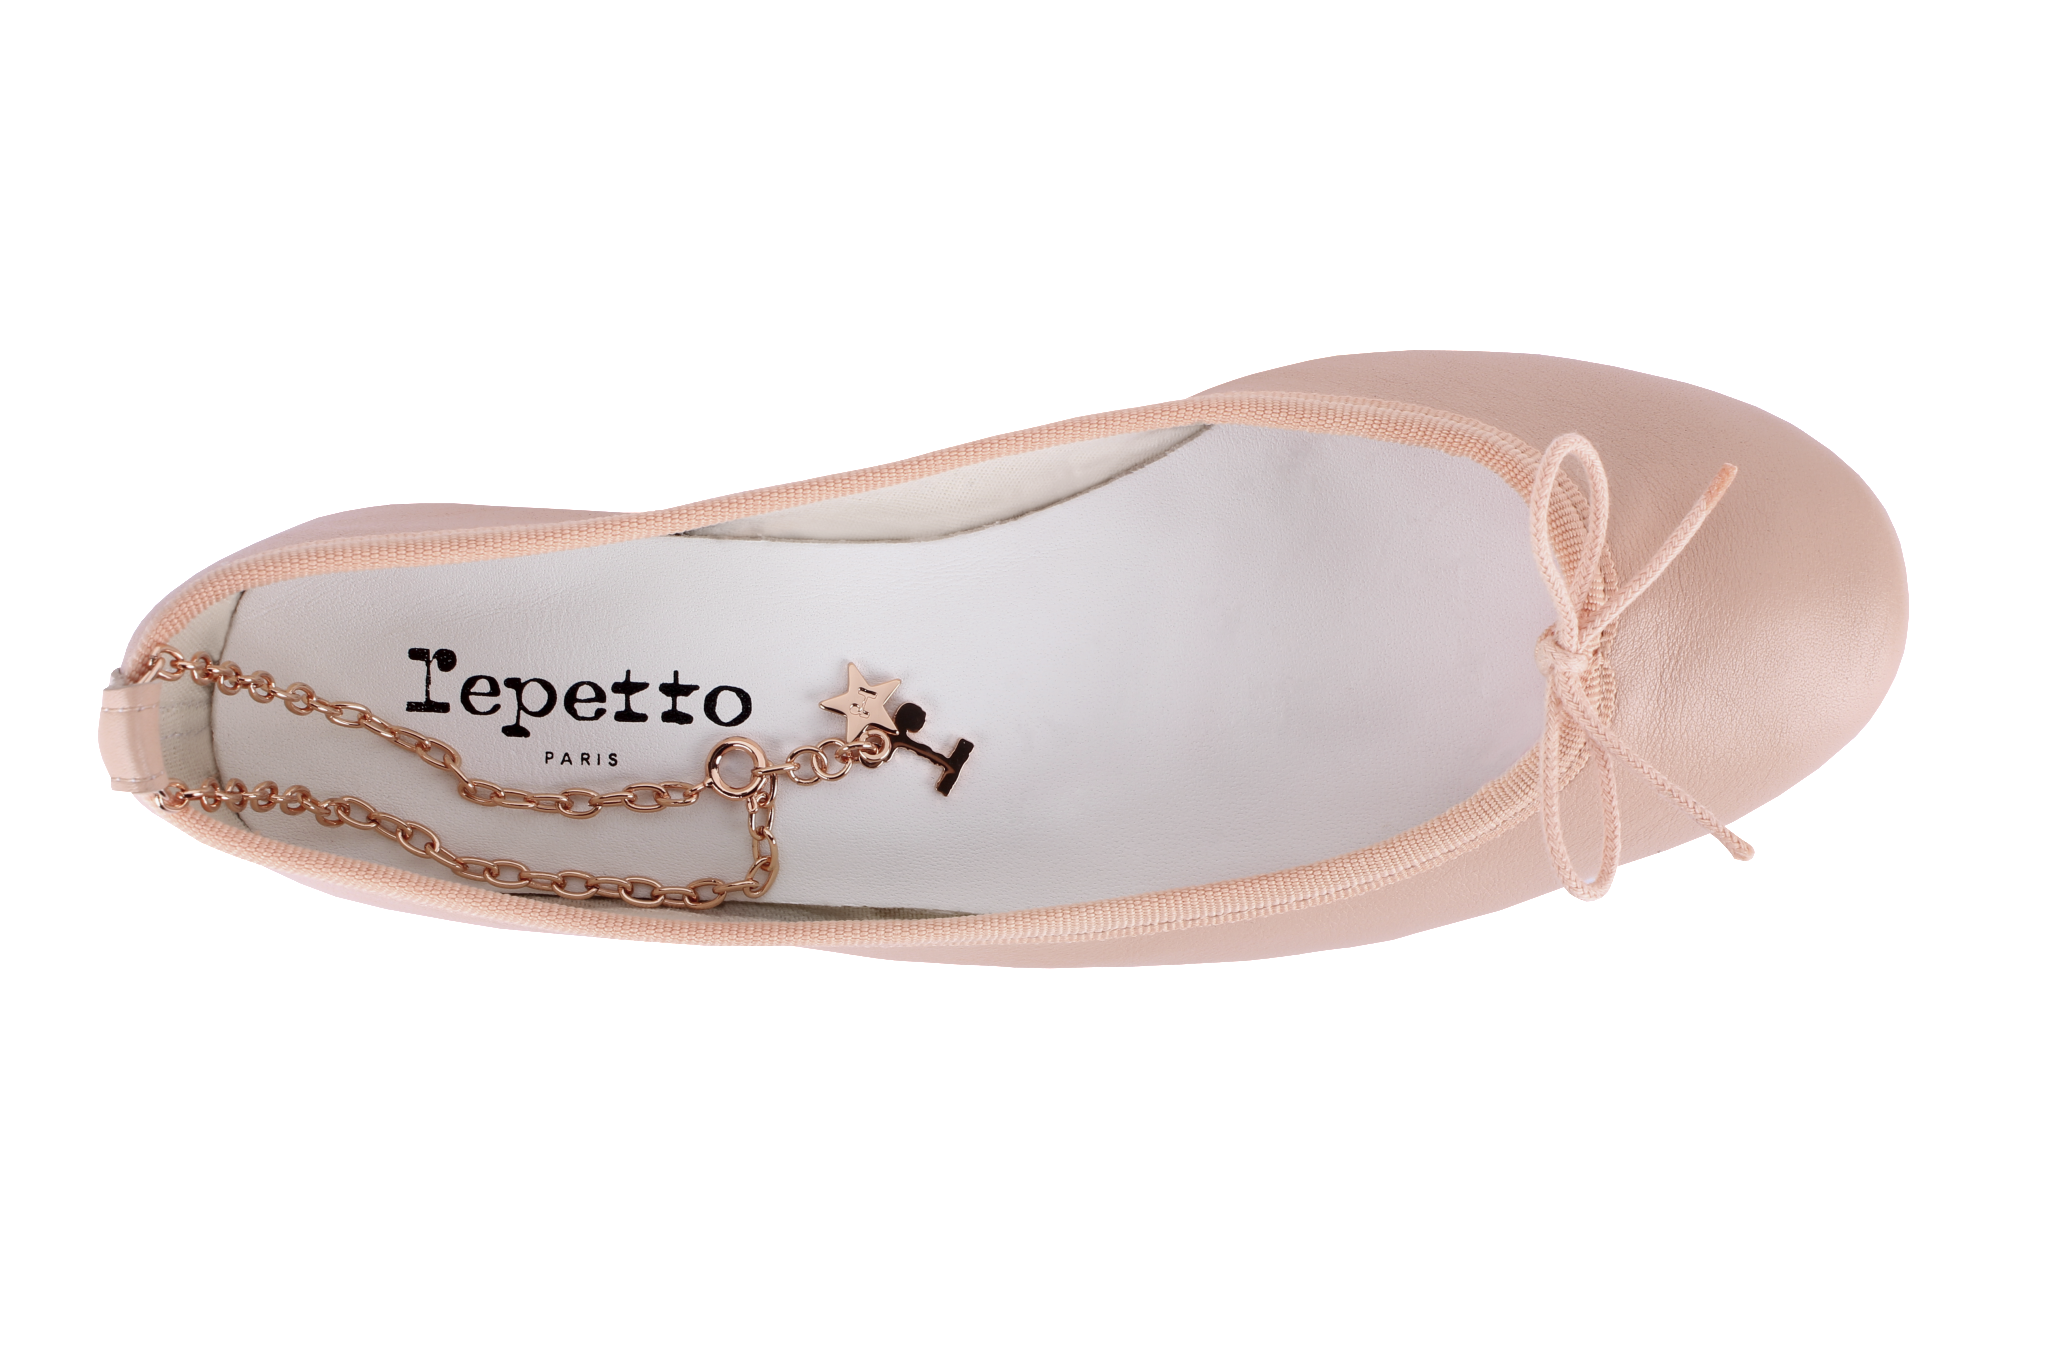 "Charmed" by Repetto